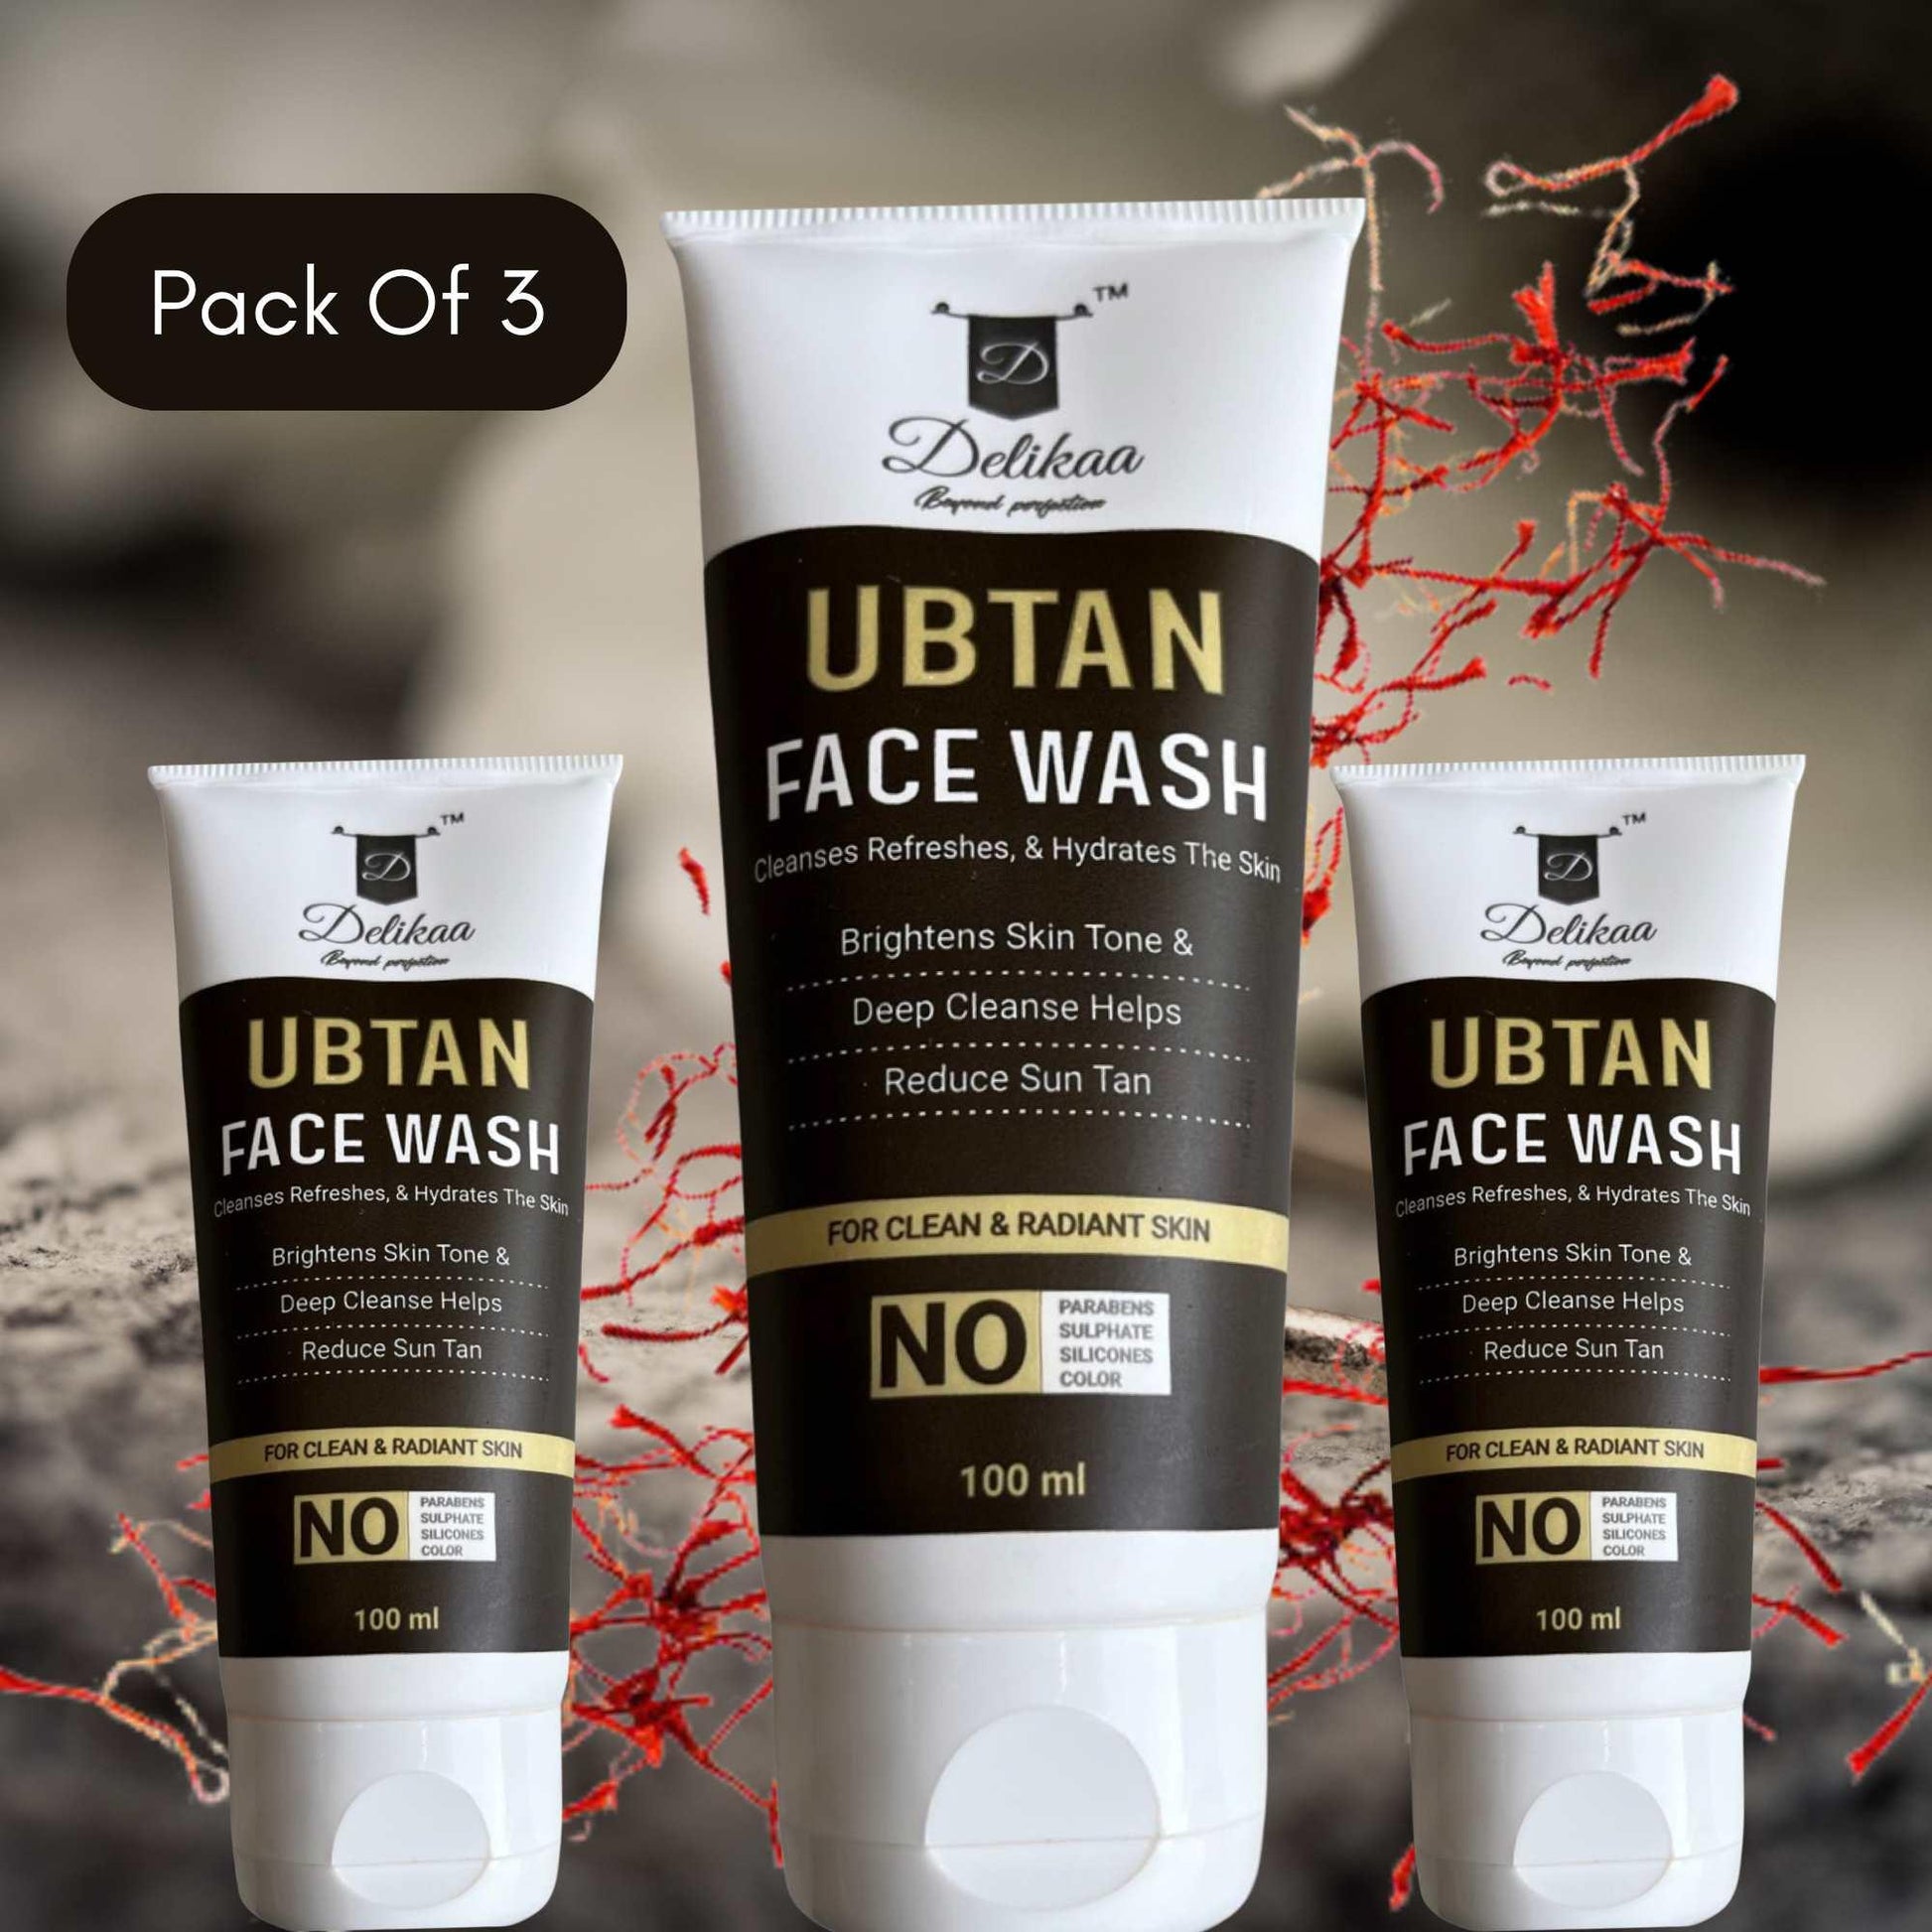 Delikaa Ubtan Face Wash With Turmeric & Neem Extract For Tan Removal & Skin Brightening 300ml - Pack Of 3